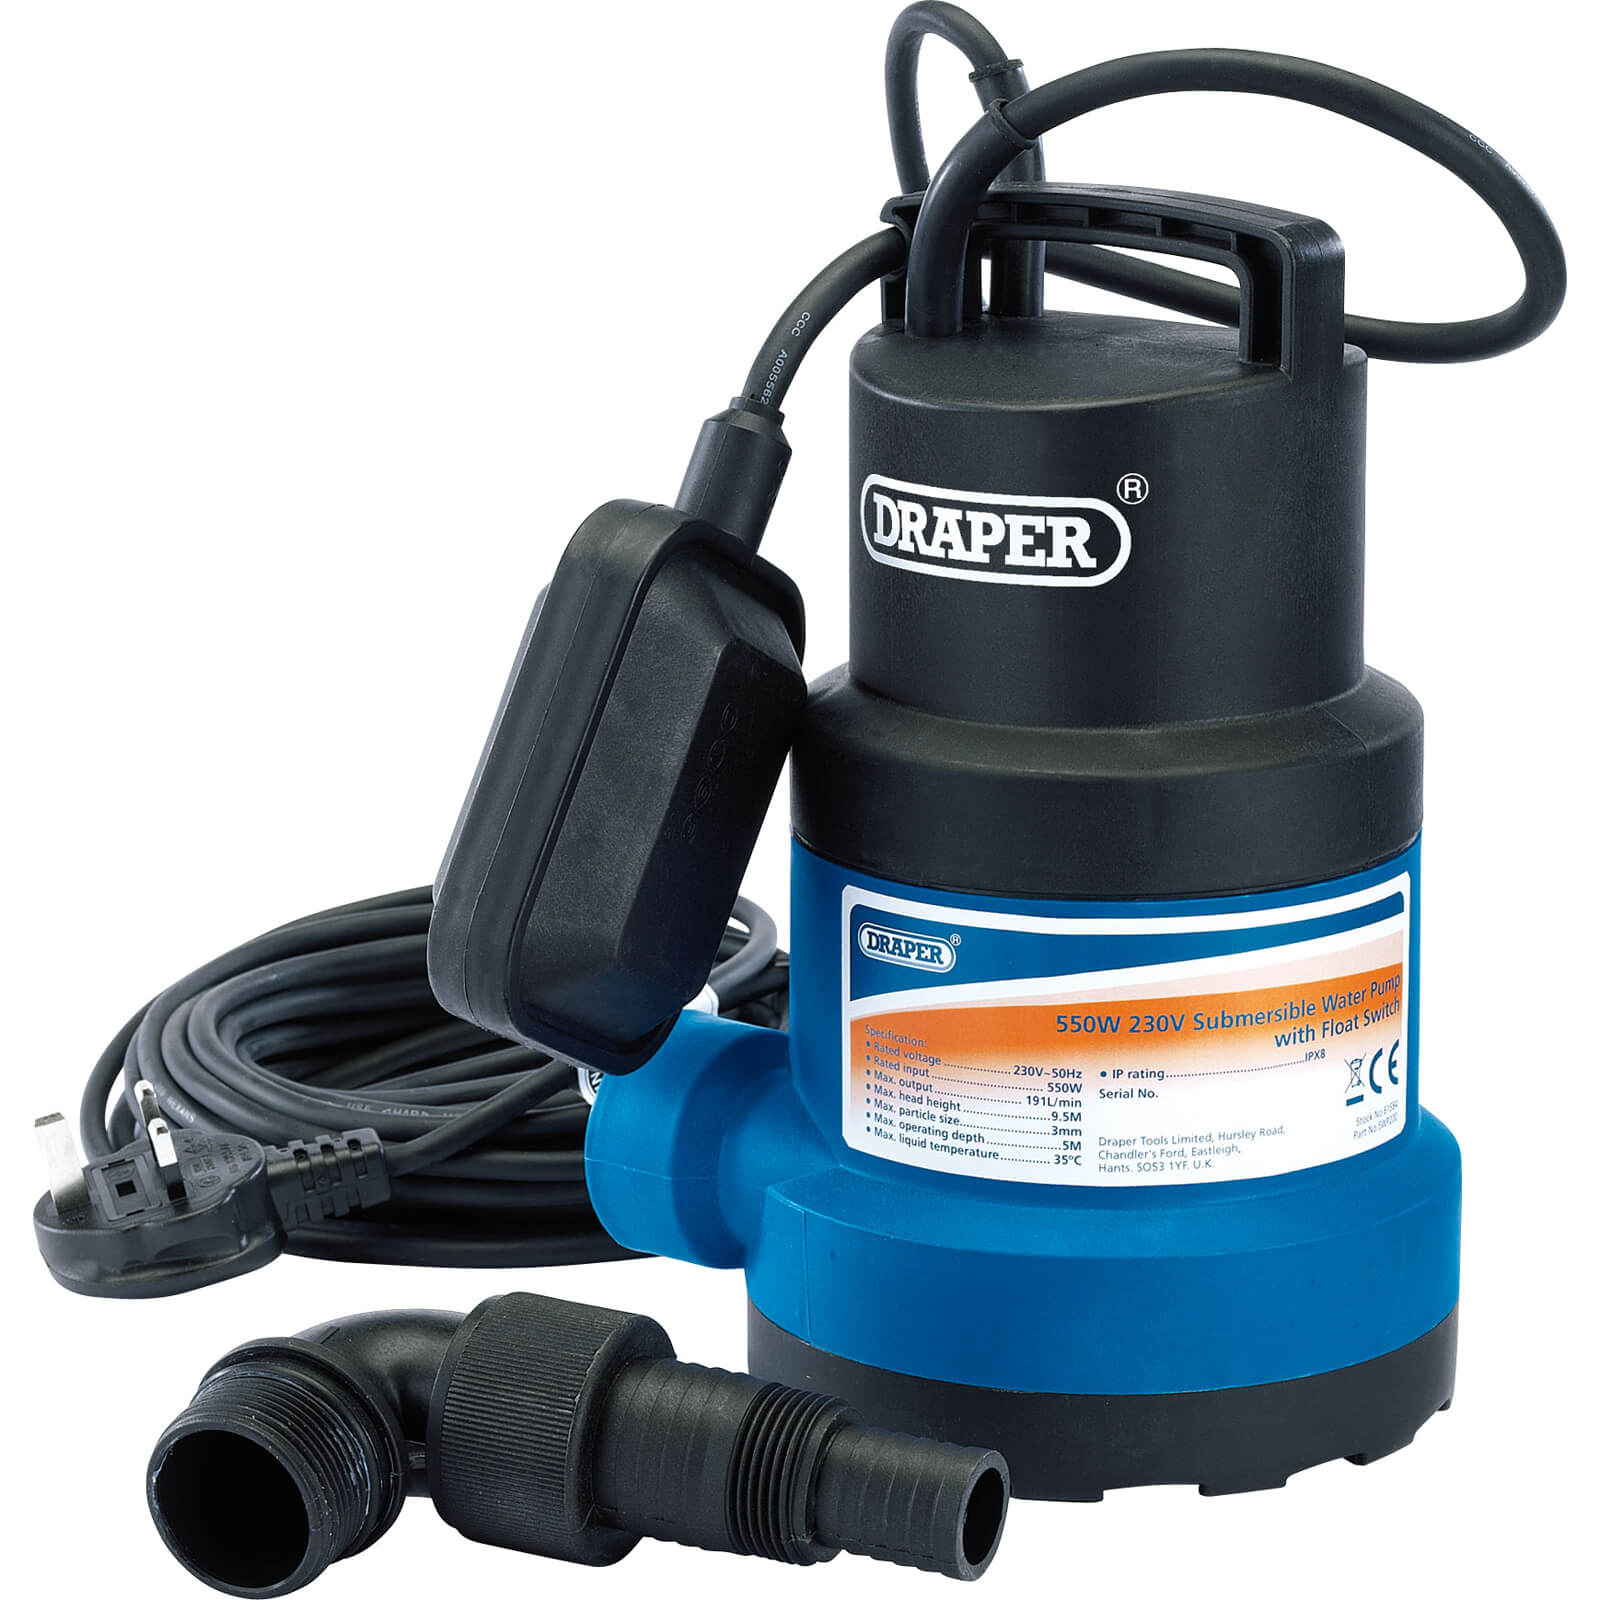 Photo of Draper Swp200 Submersible Dirty Water Pump 240v